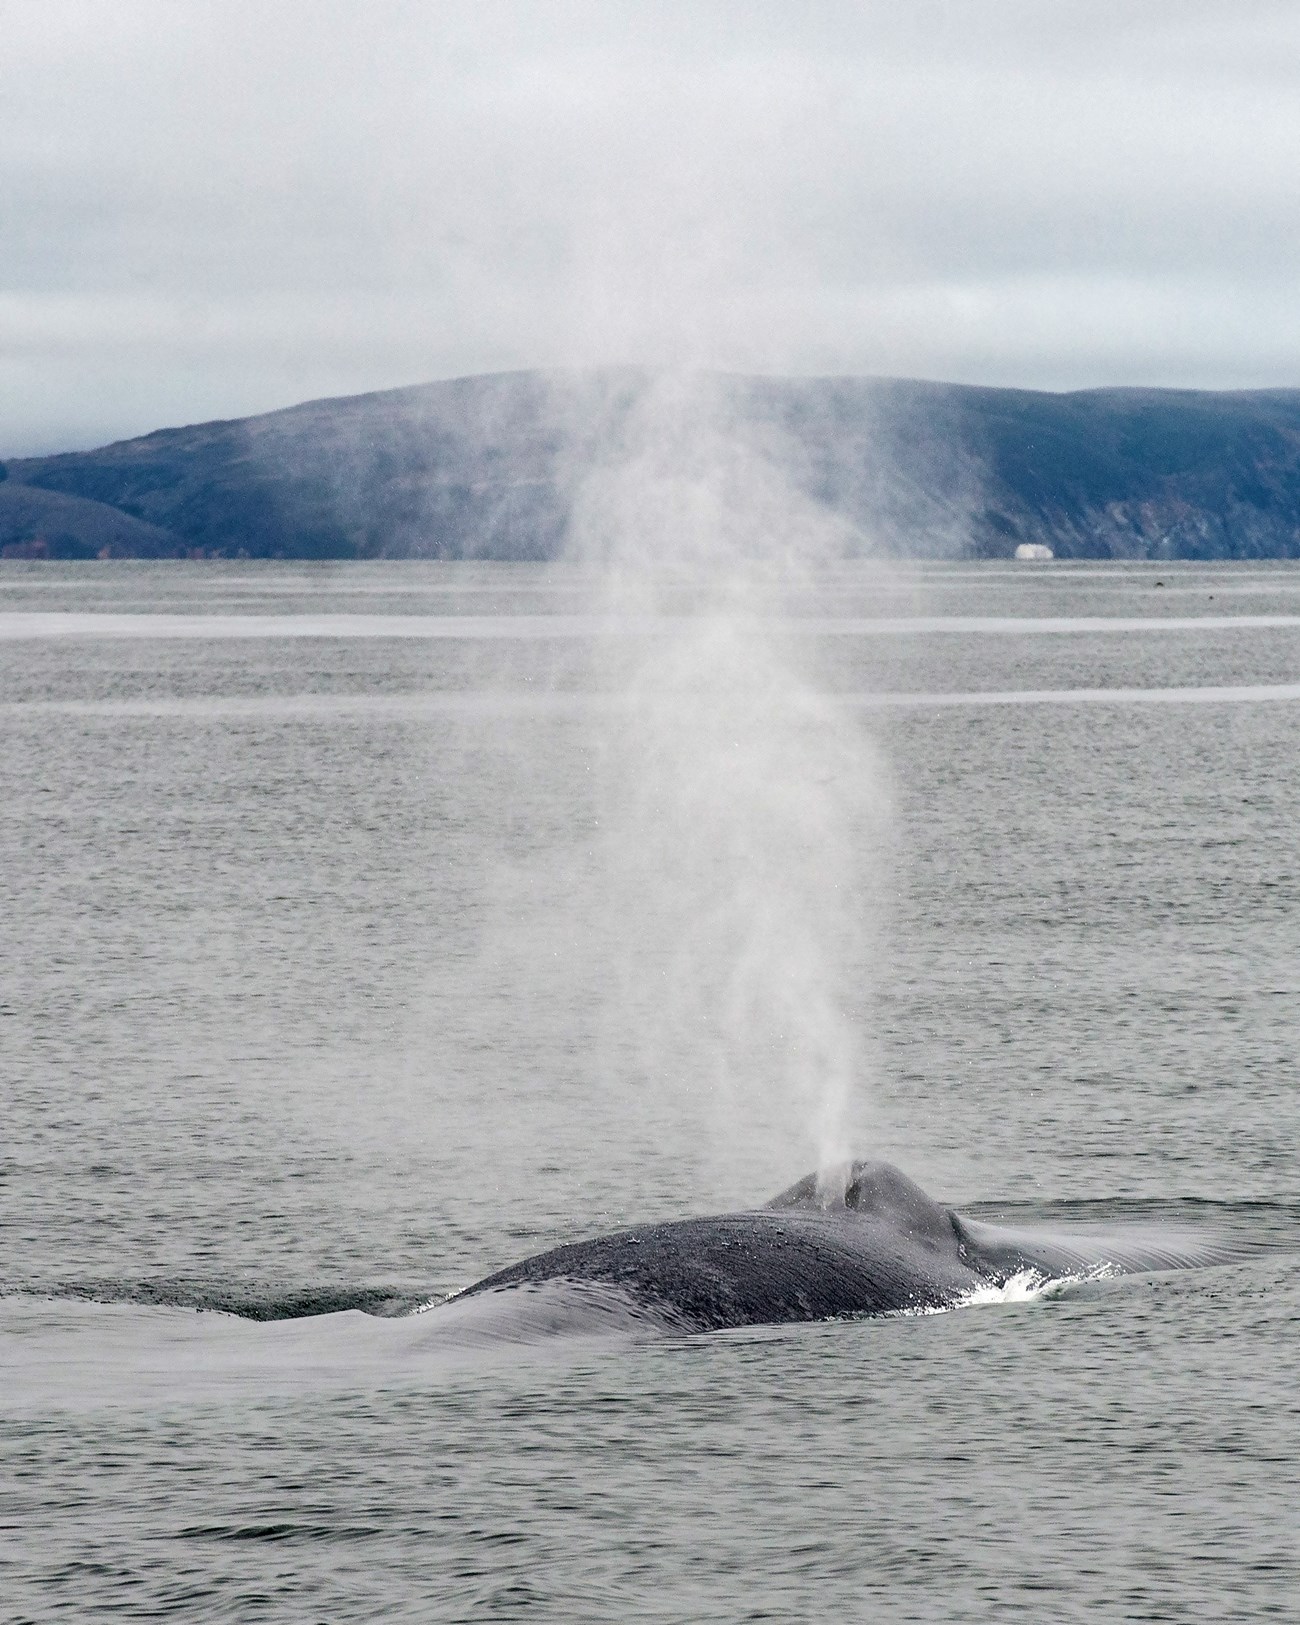 Blue whale spouting, with the California coast in the background.